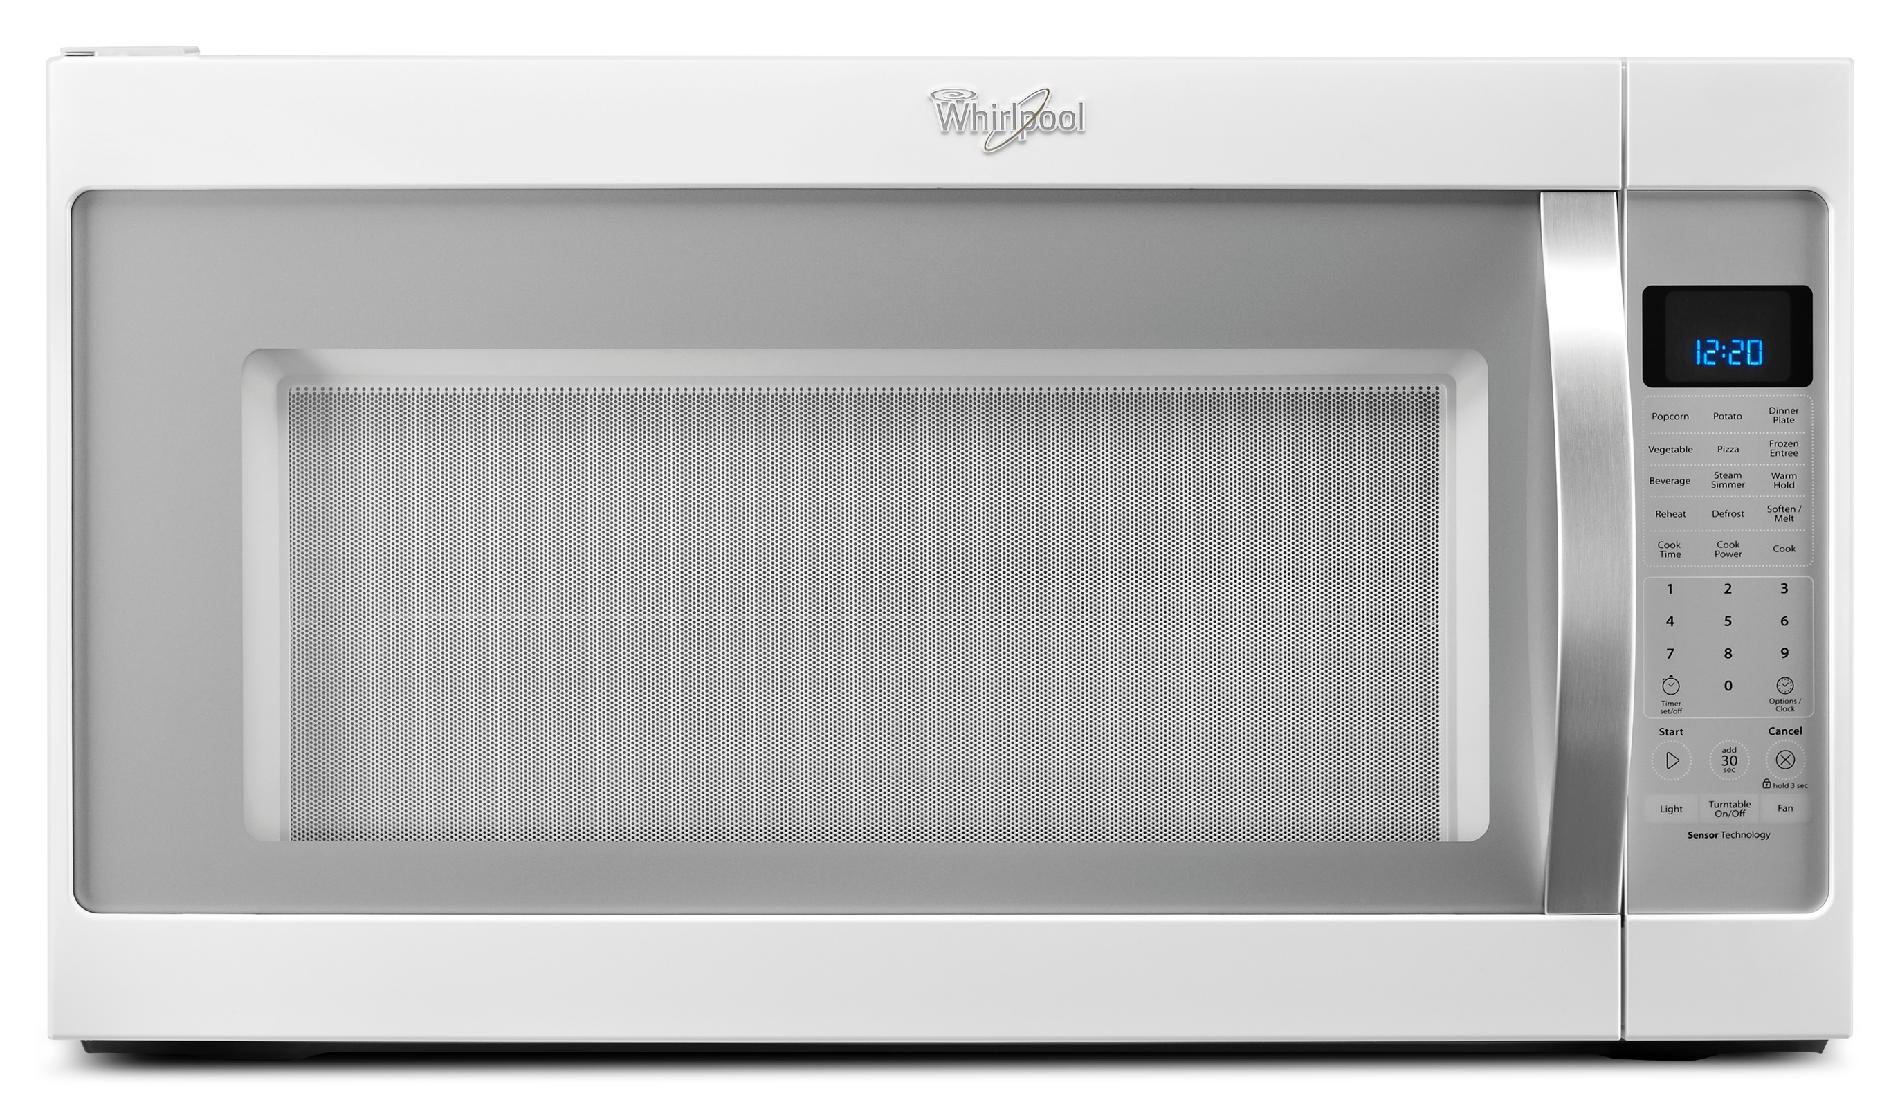 Whirlpool 2.0 cu. ft. Over-the-Range Microwave Non-Stick Interior